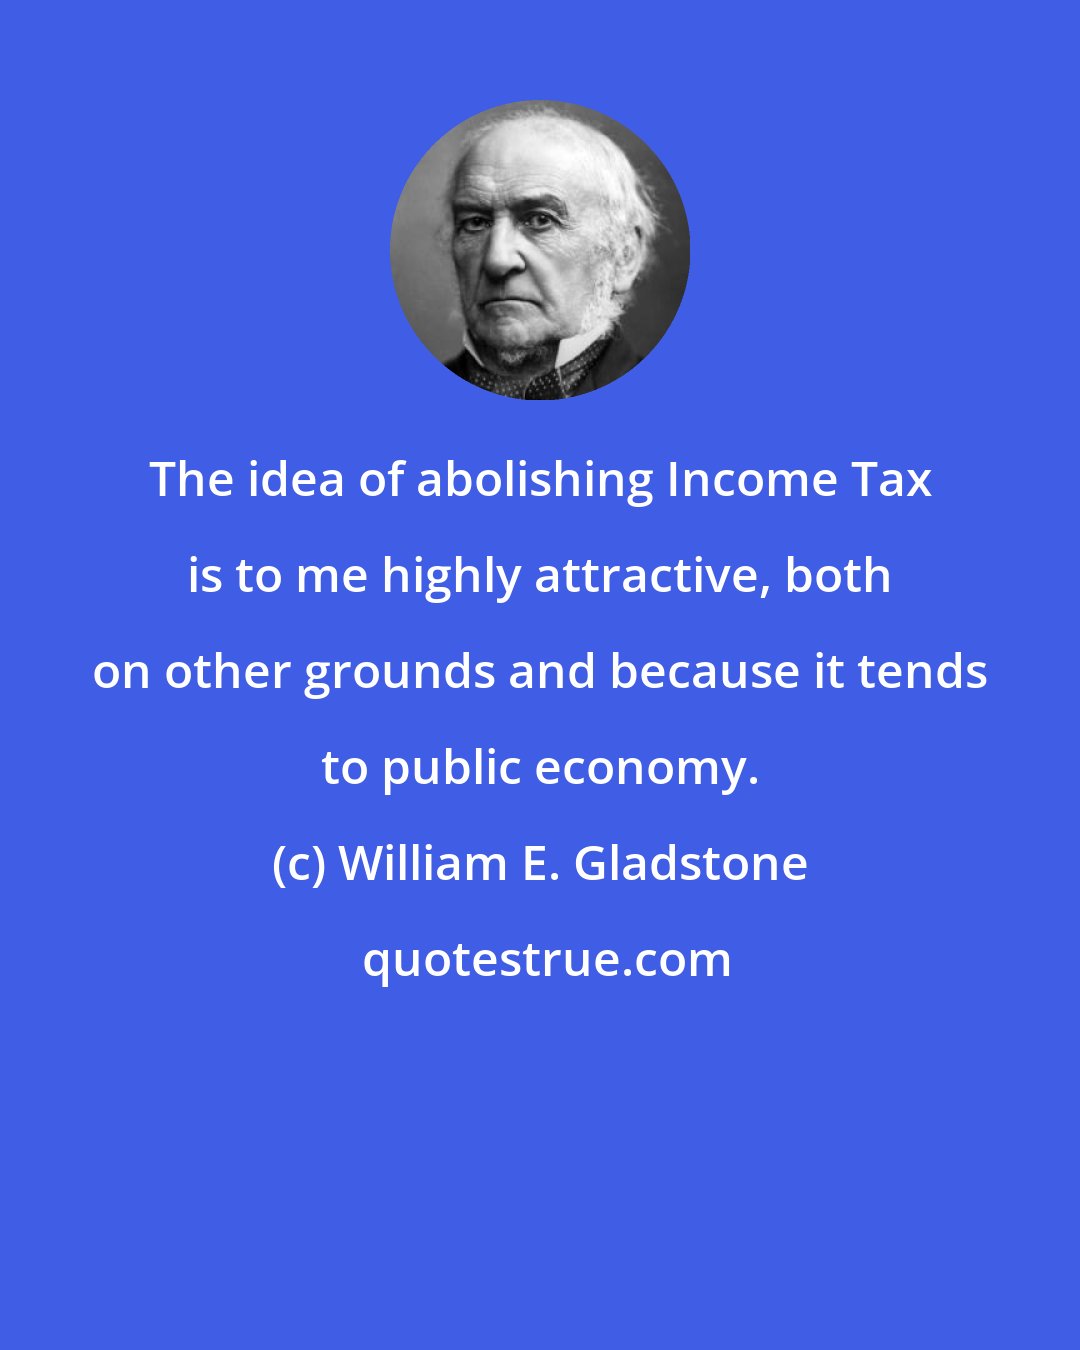 William E. Gladstone: The idea of abolishing Income Tax is to me highly attractive, both on other grounds and because it tends to public economy.